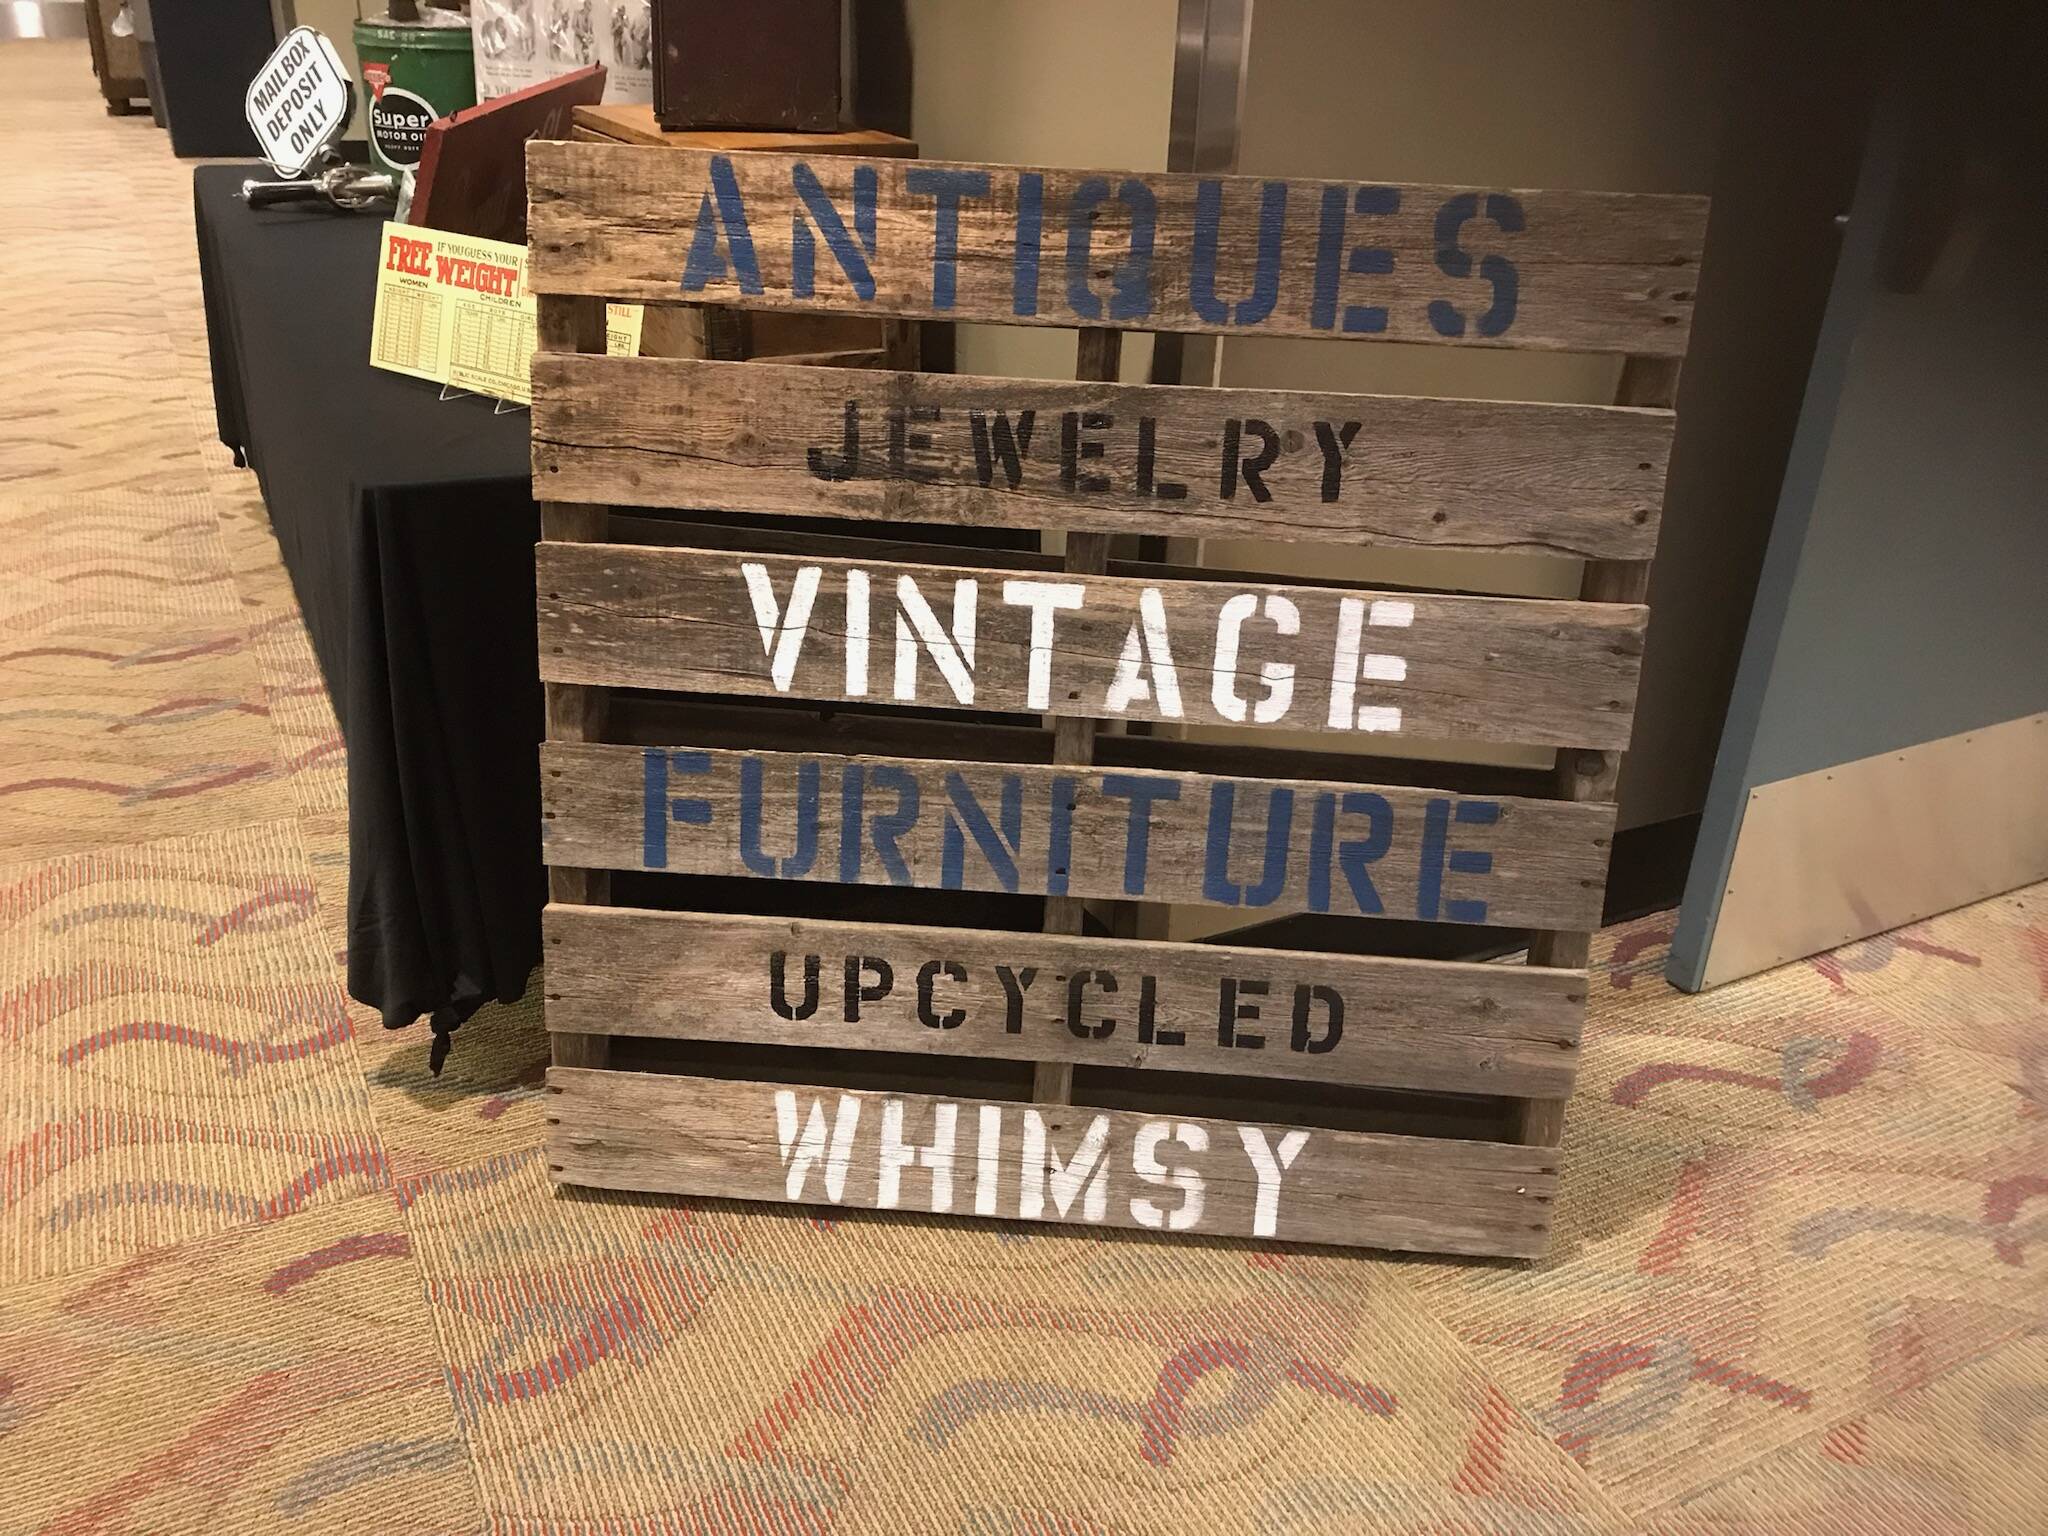 Photo Courtesy of Dianne Hansen 
While antiques will be the main attraction at the Ocean Shores Renewed Antique Show, guests will also have the opportunity to check out some upcycled, vintage, whimsical, and one-of-a-kind items over the duration of the three-day event at the Ocean Shores Convention Center.